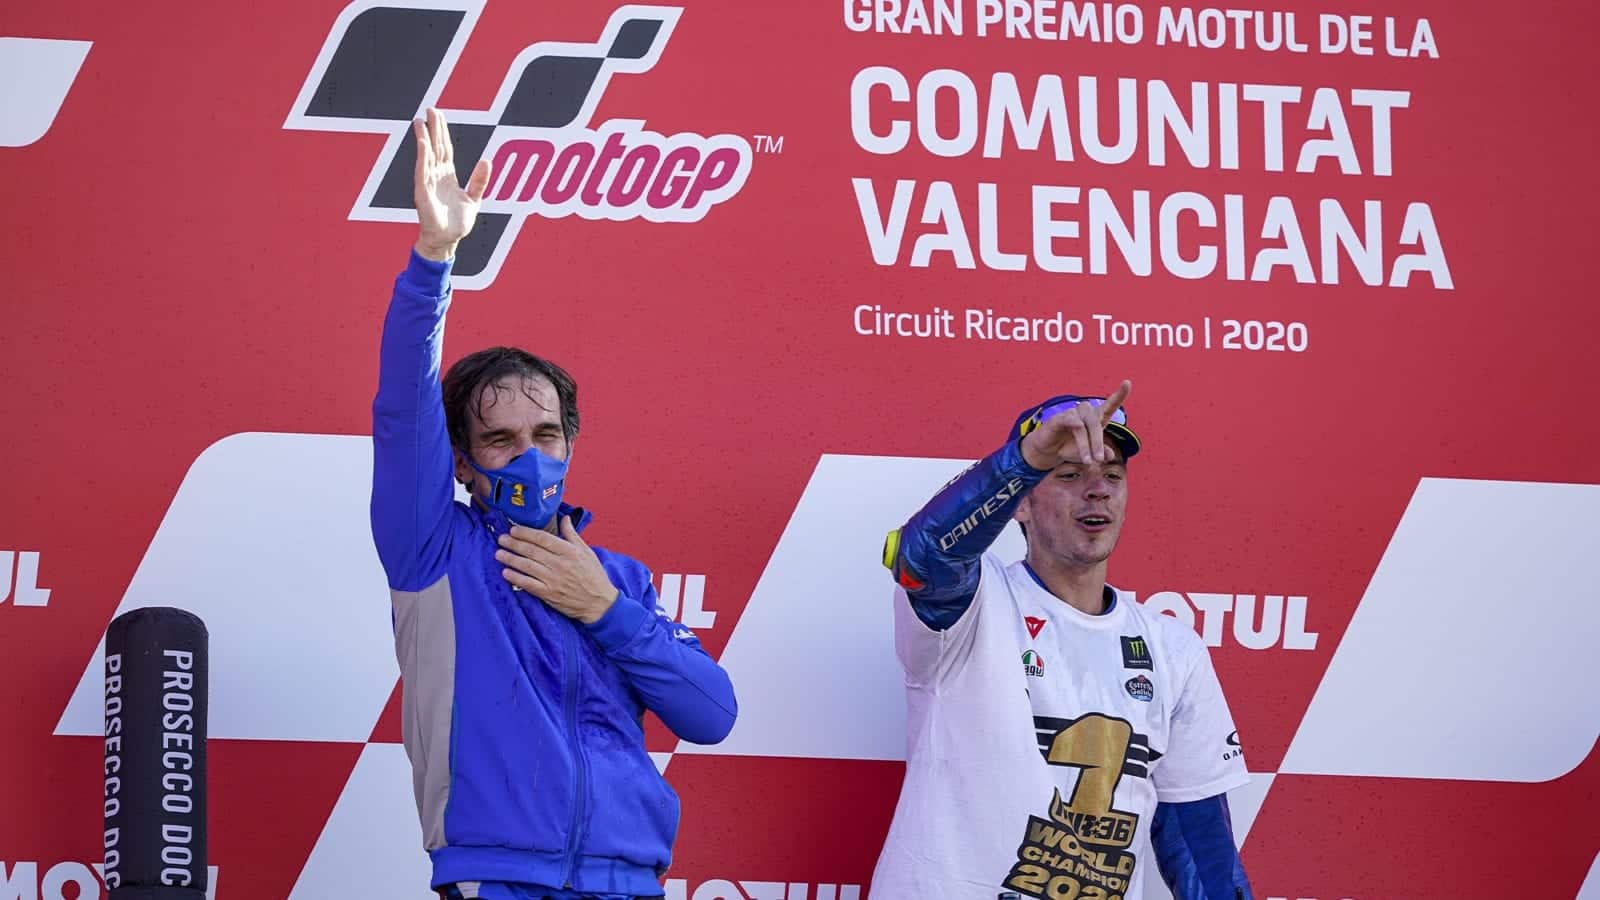 Joan Mir on the Valencia podium with Davide Brivio his team manager after winning the 2020 MotoGP World Championship